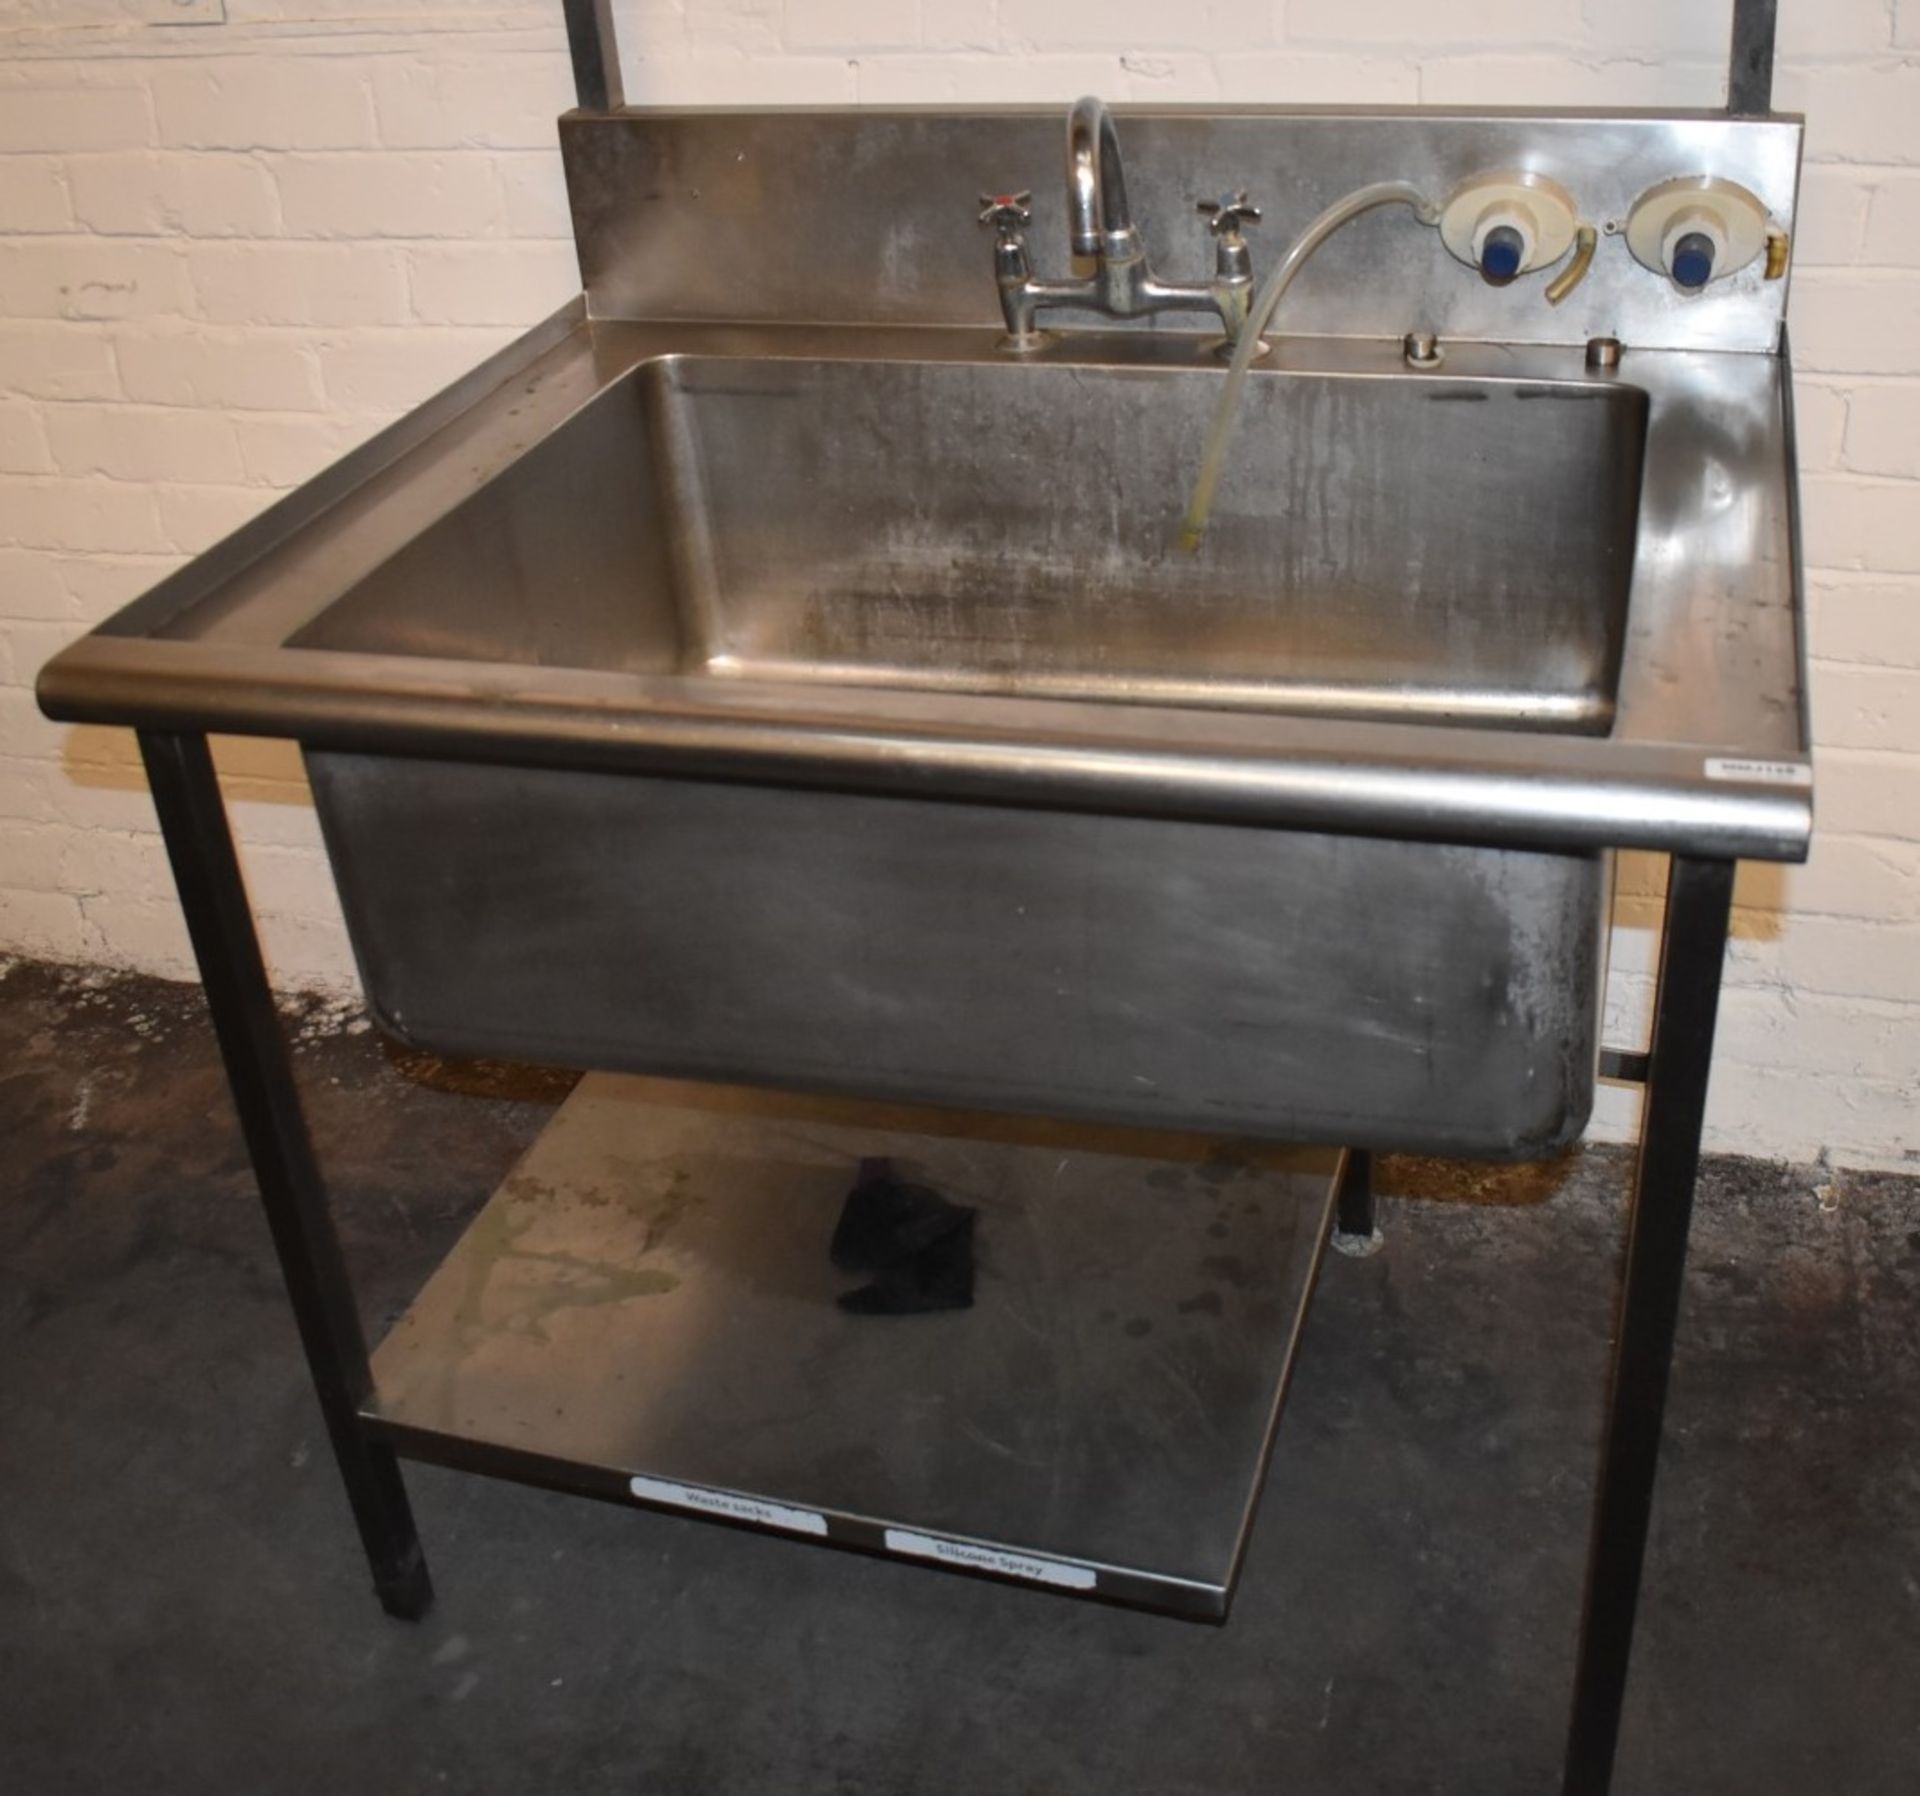 1 x Stainless Steel Sink Unit Featuring a Large 80x60cm Wash Bowl, Mixer Taps, Soap Dispensers, - Image 7 of 11